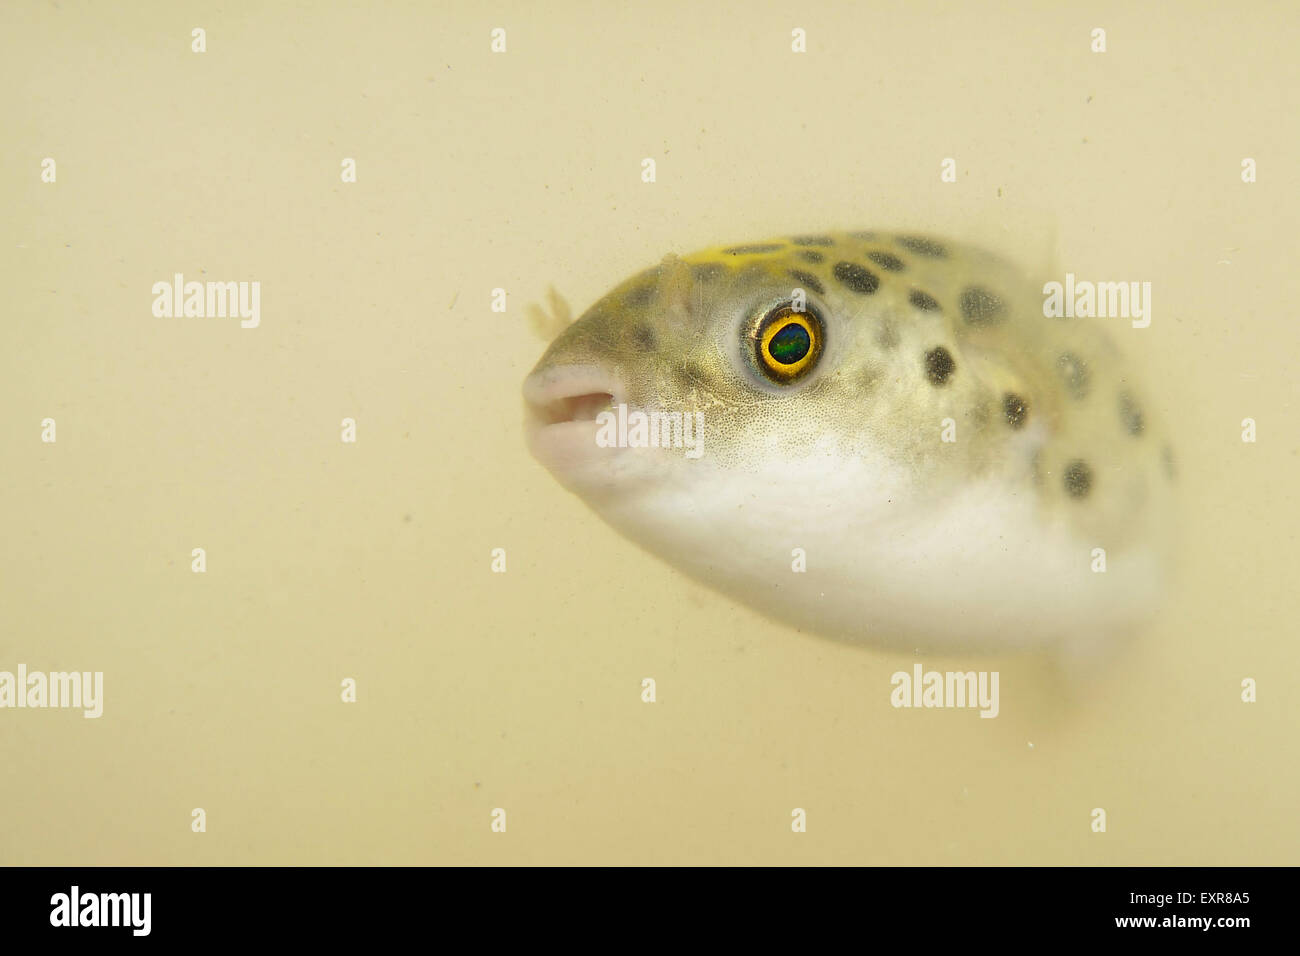 Portrait of a Green Spotted Puffer Fish Stock Photo